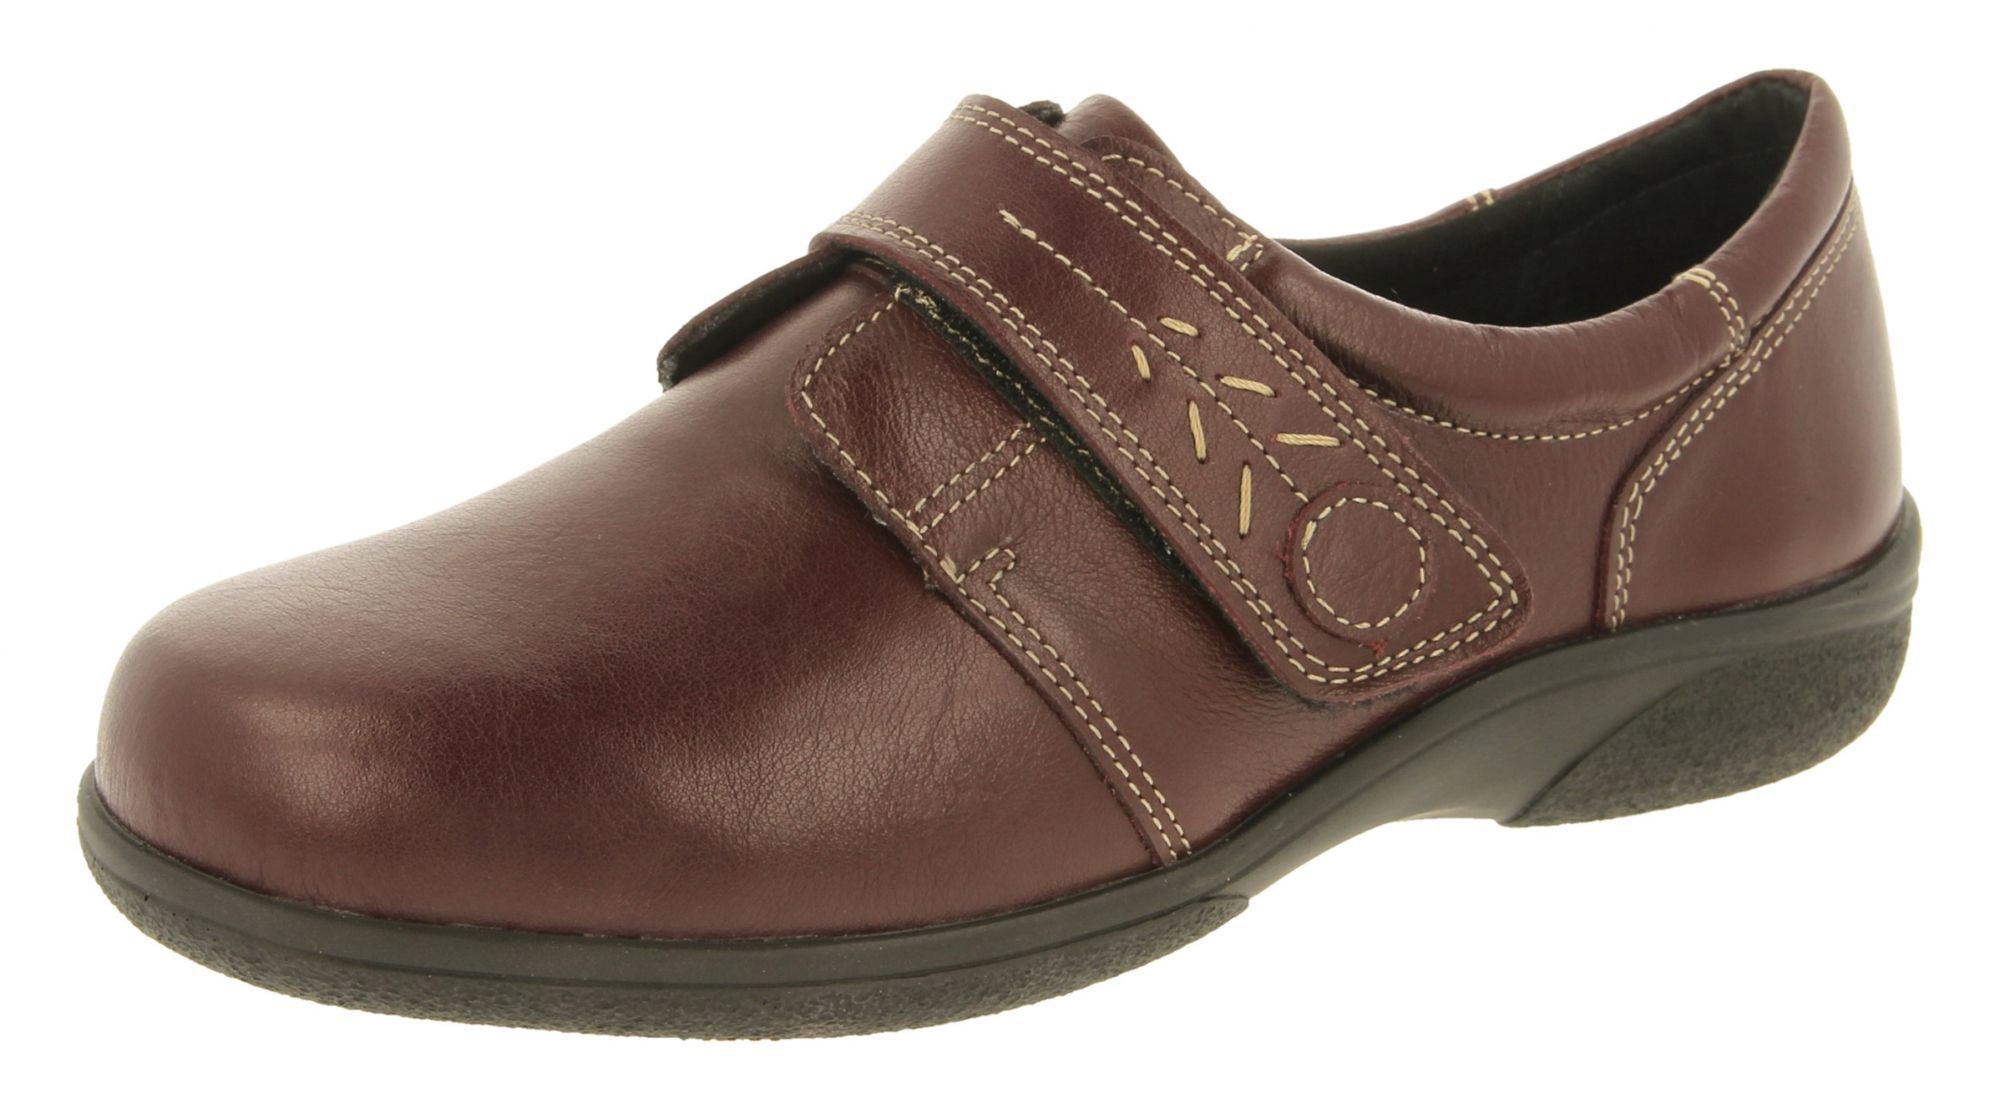 DB Shoes Rory 78989B Ladies Burgundy Leather Touch Fastening Shoes